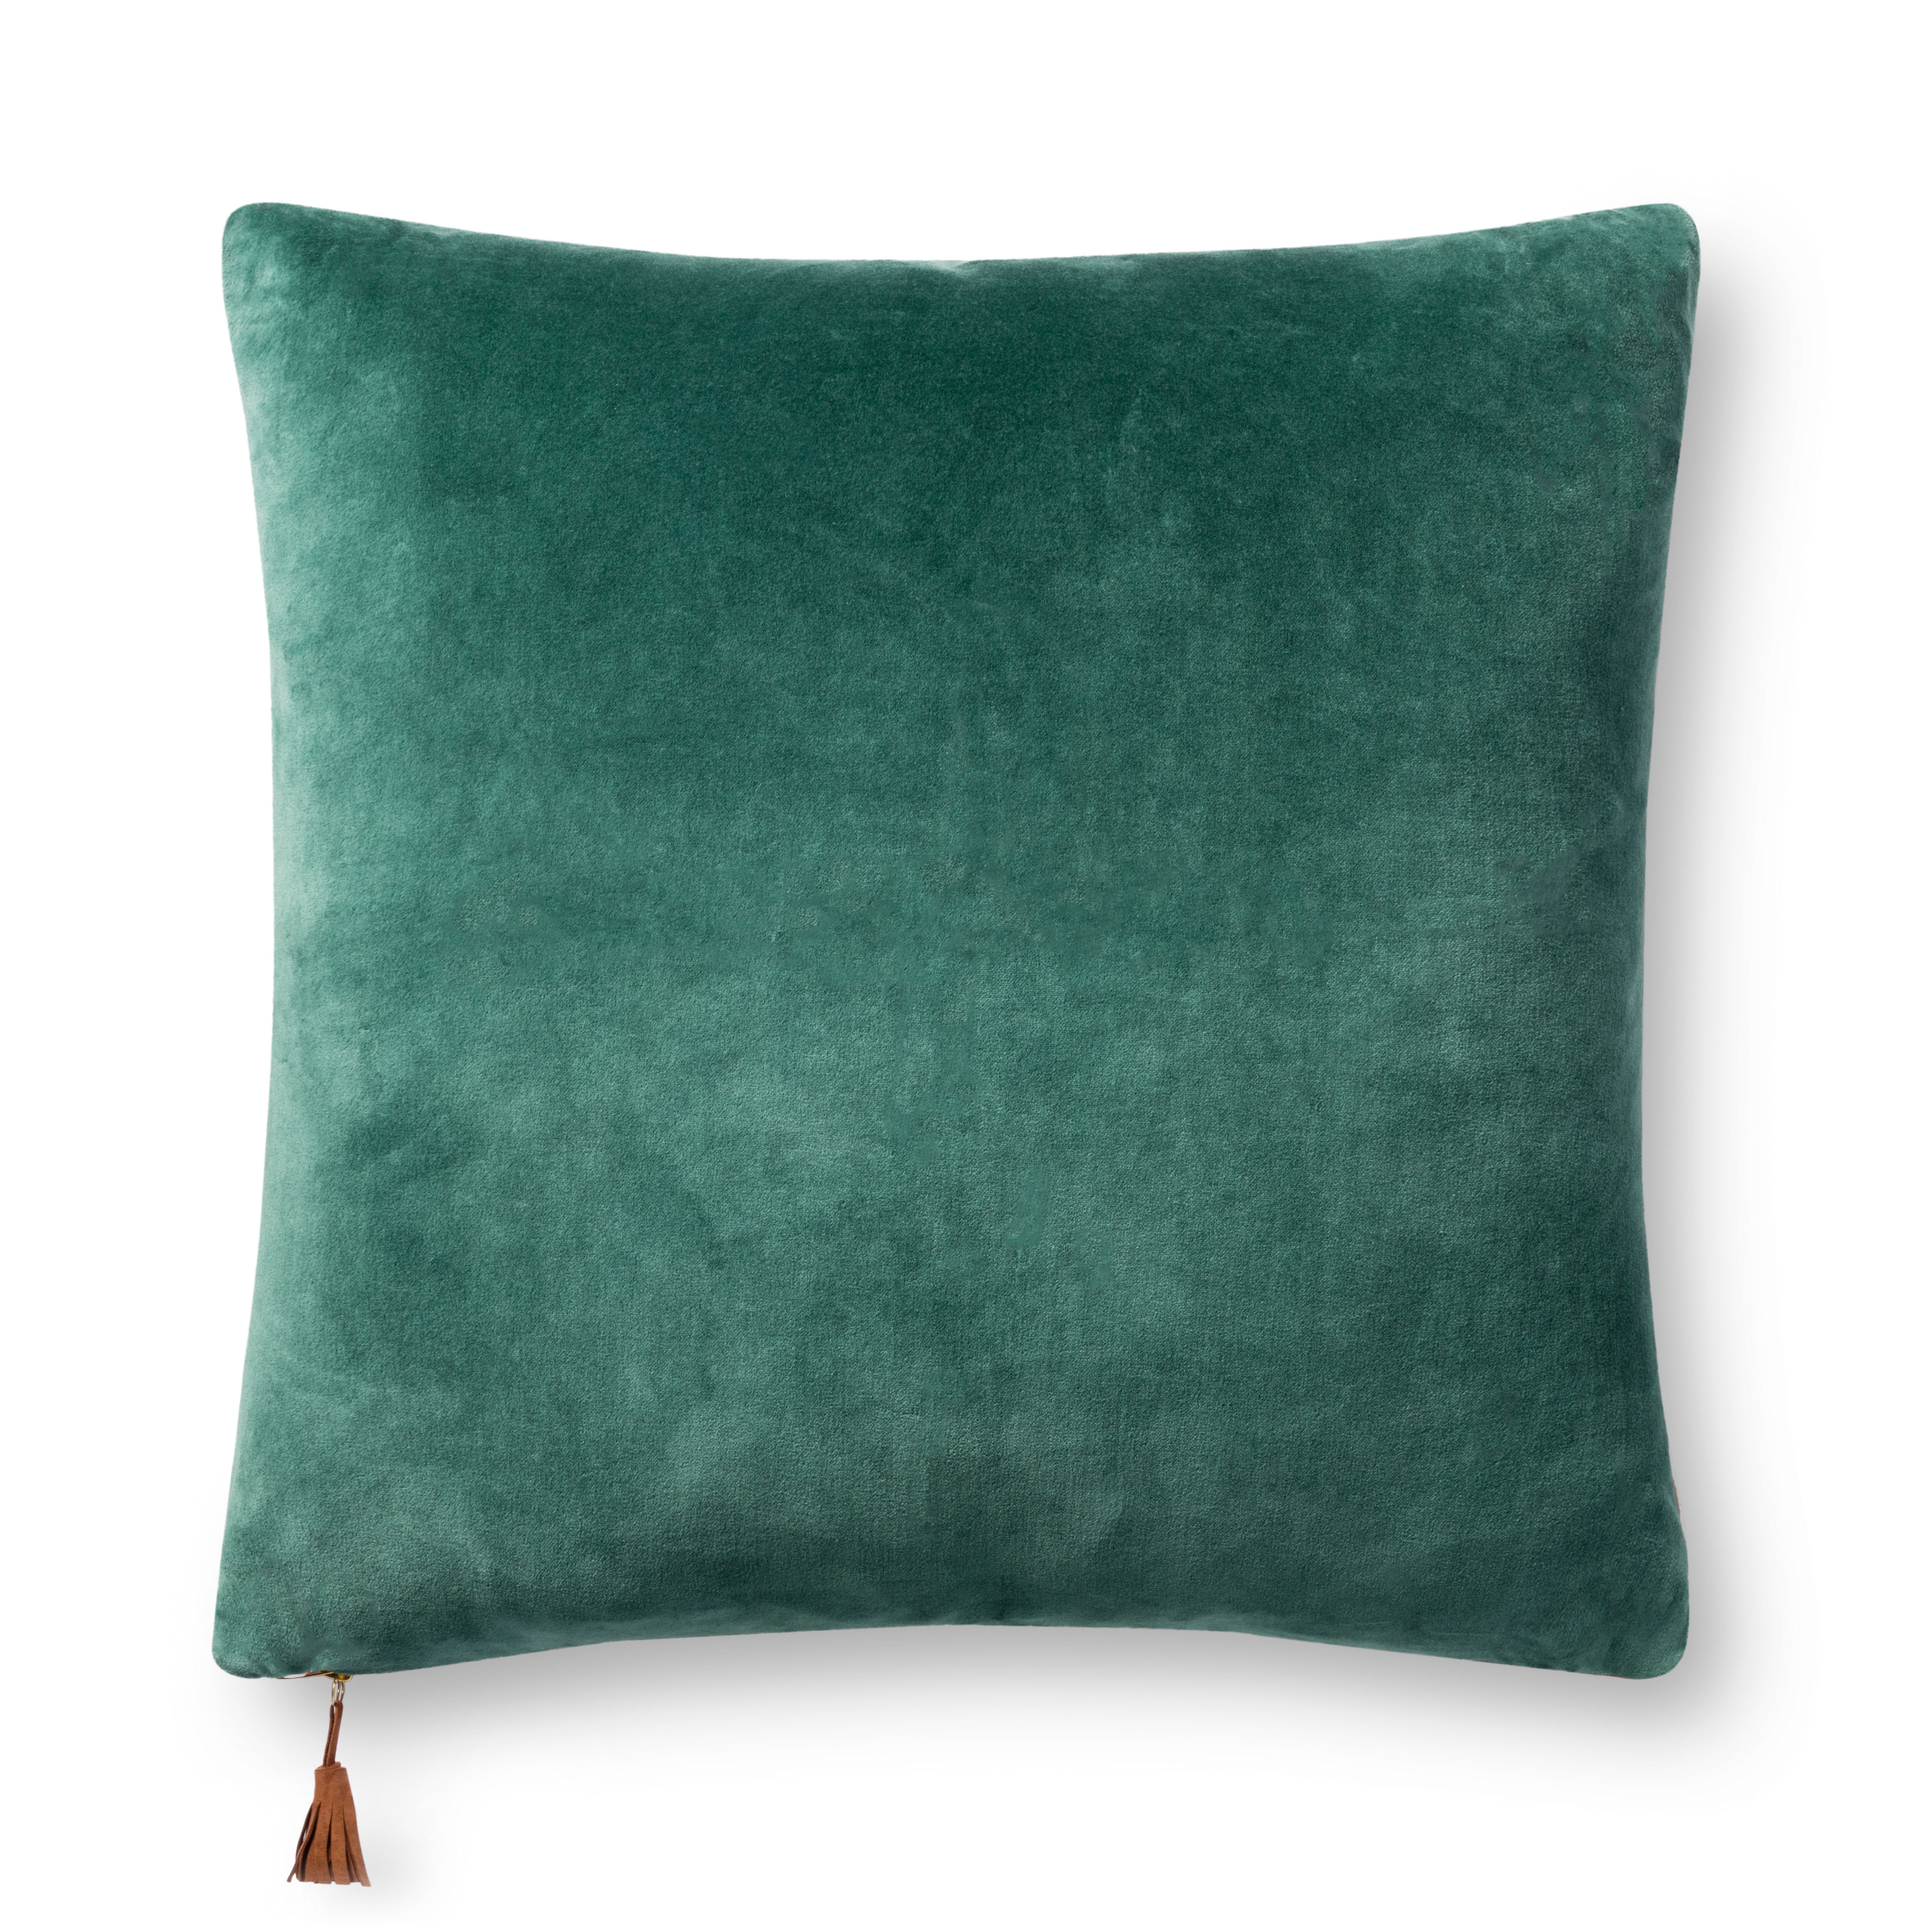 PILLOWS P1153 EMERALD / AMBER 22" x 22" Cover w/Poly - Image 0